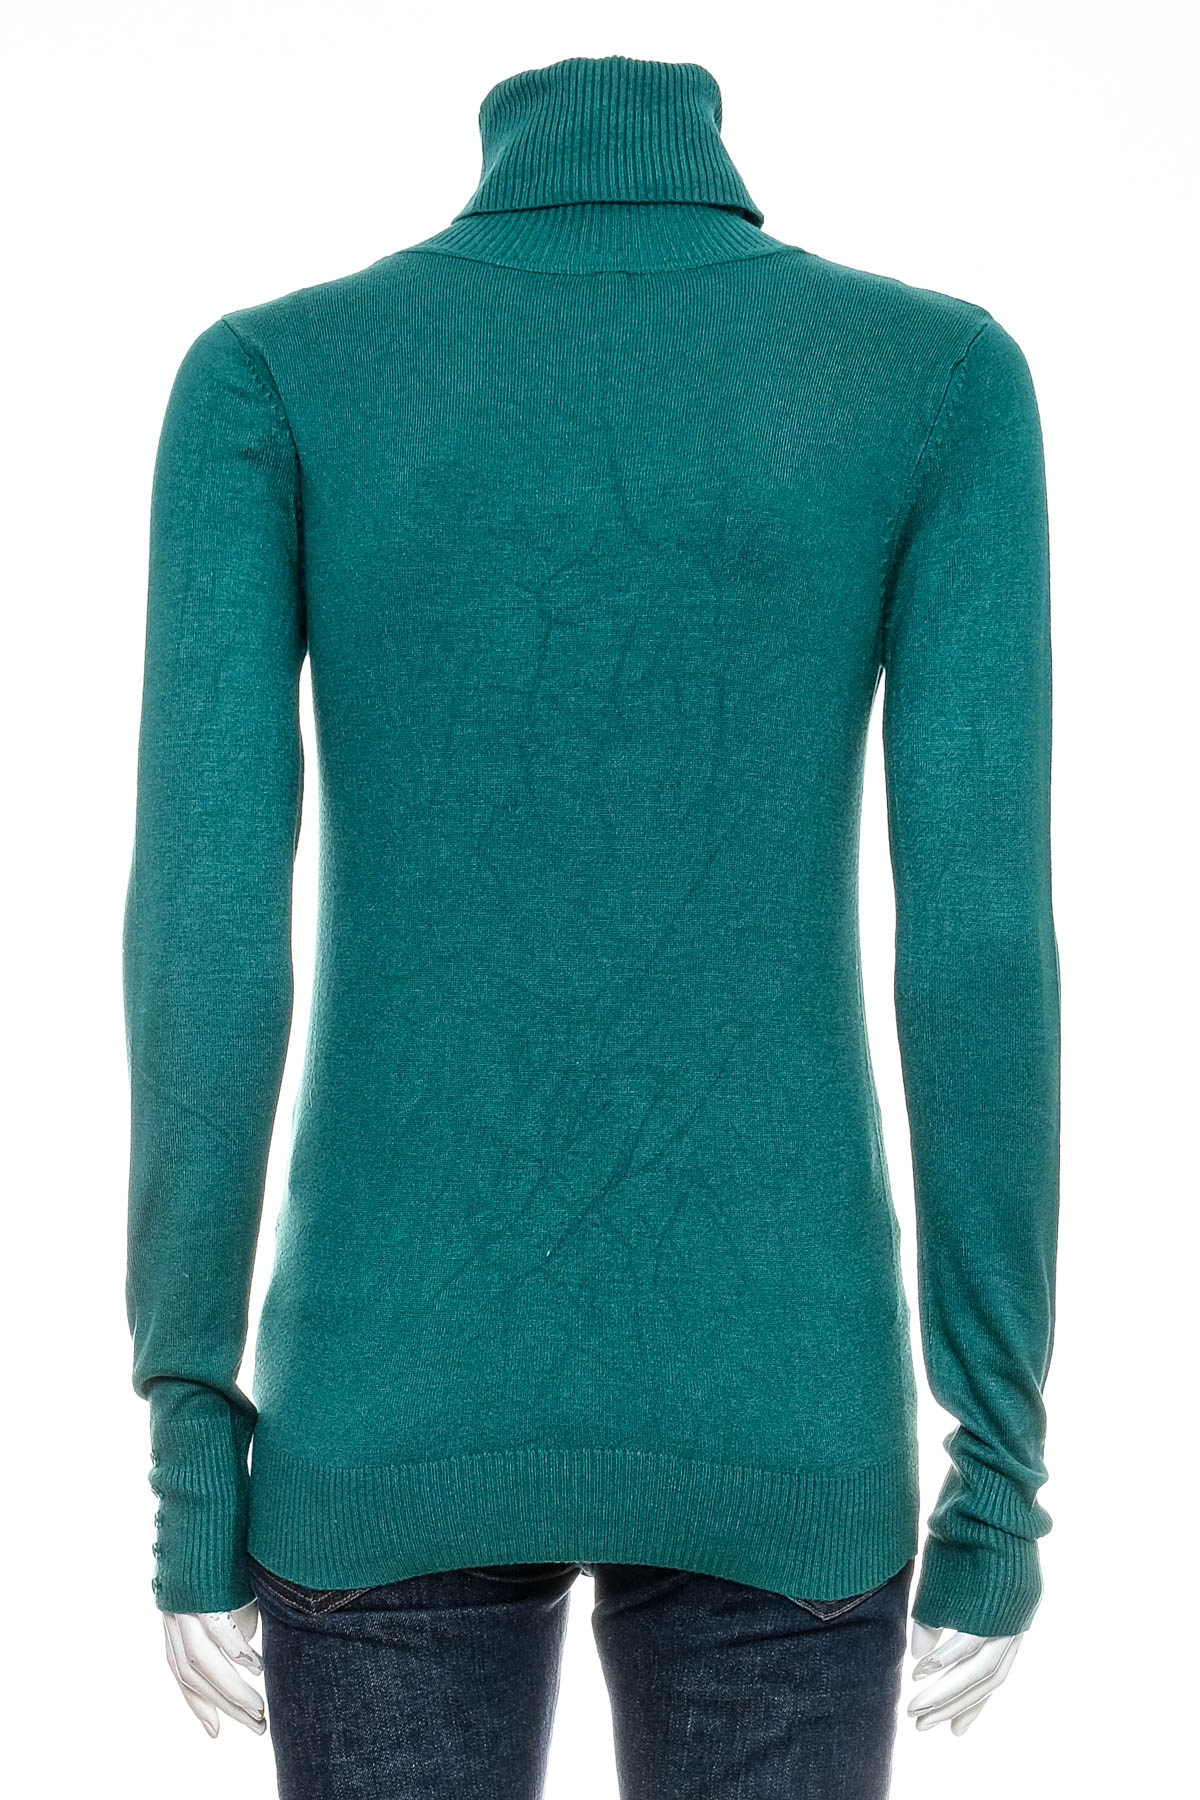 Women's sweater - COLOURS OF THE WORLD - 1